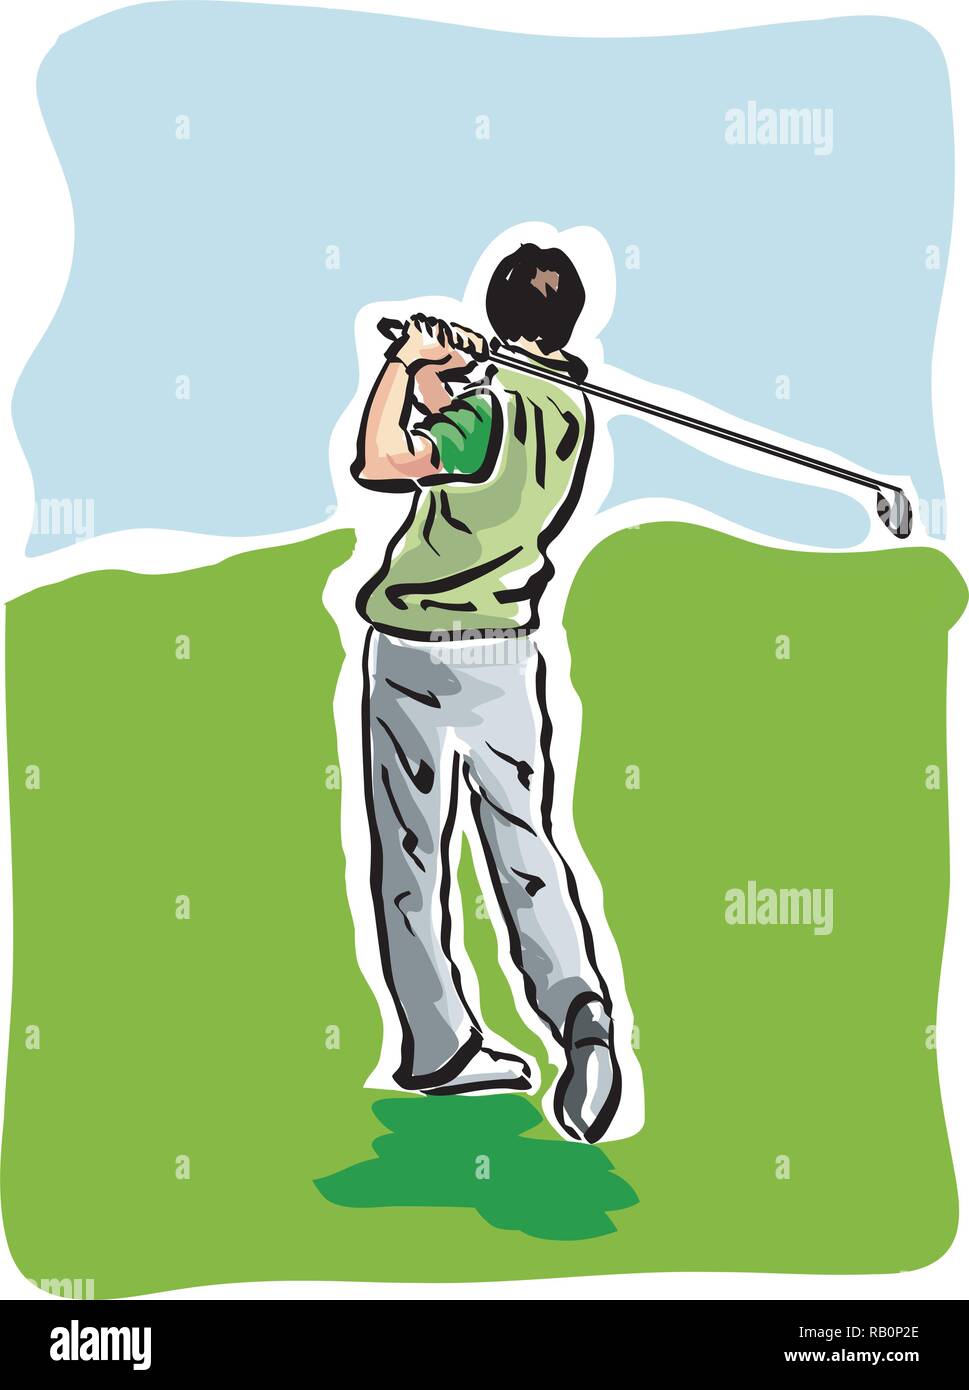 vector Illustration of a golf player Stock Vector